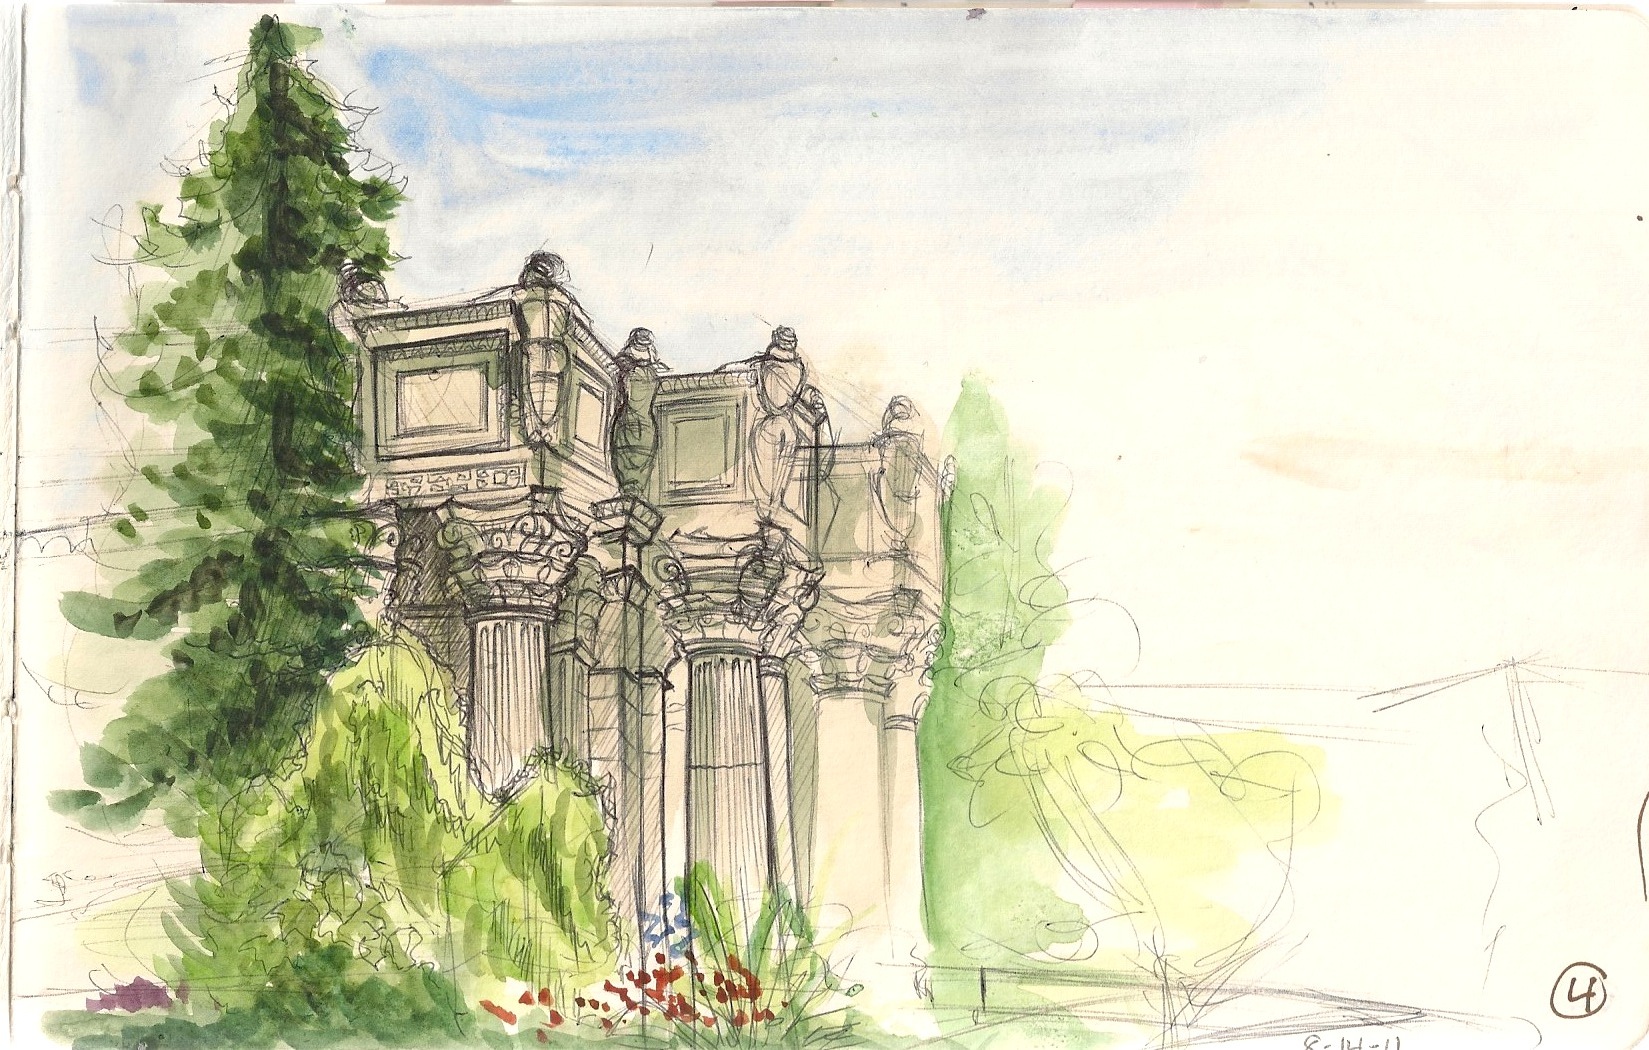 watercolor and ballpoint sketch of the Palace of Fine arts in San Franscisco